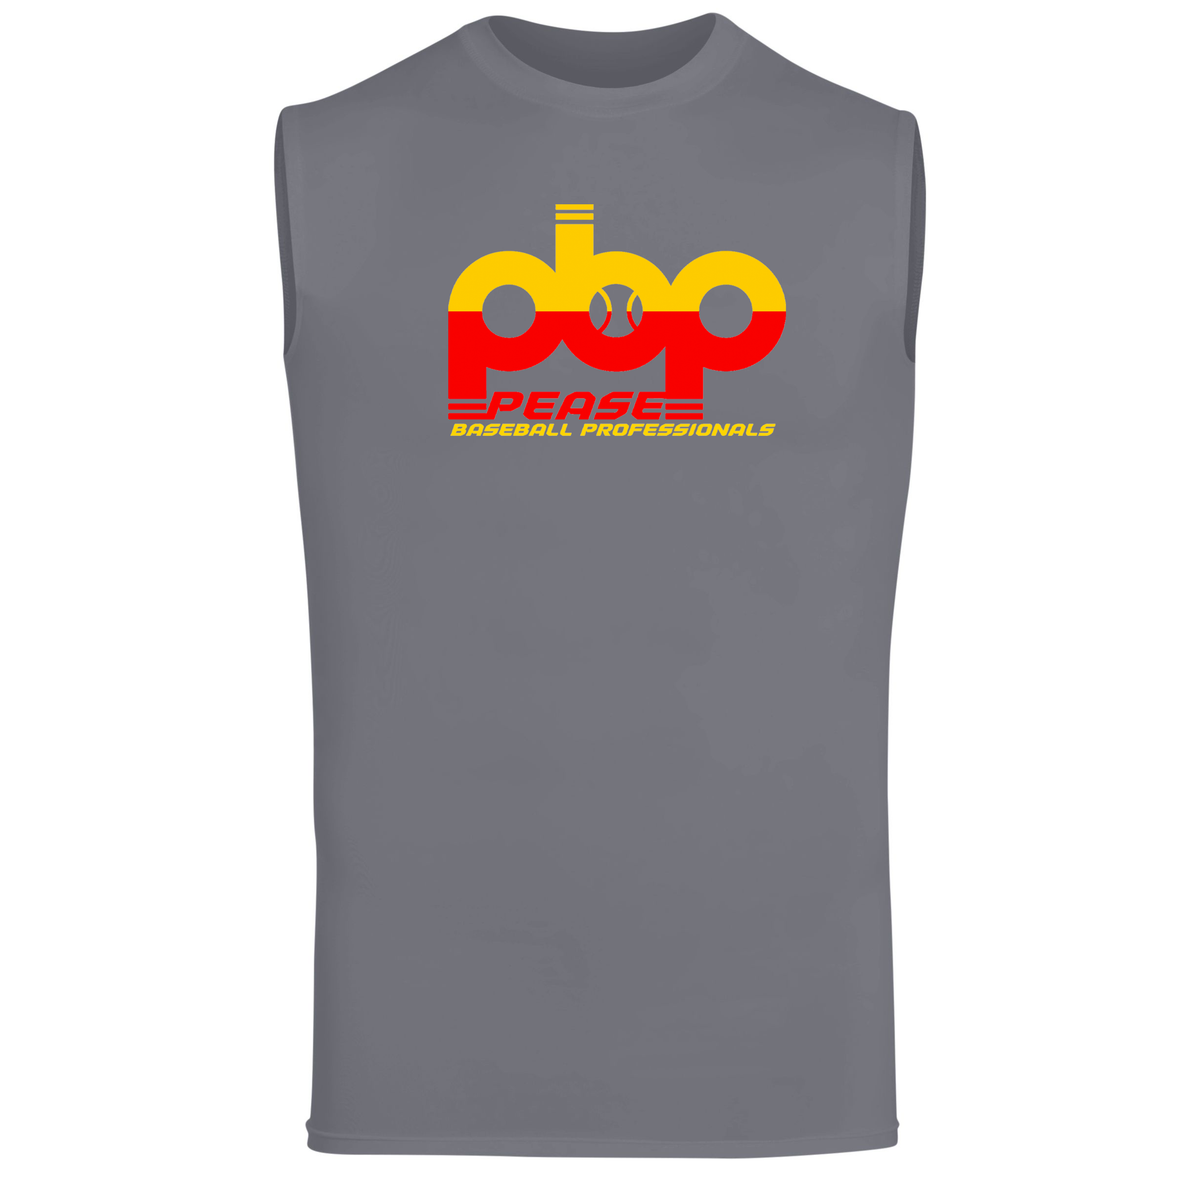 Pease Baseball Professionals Hyperform Compression Sleeveless Tee